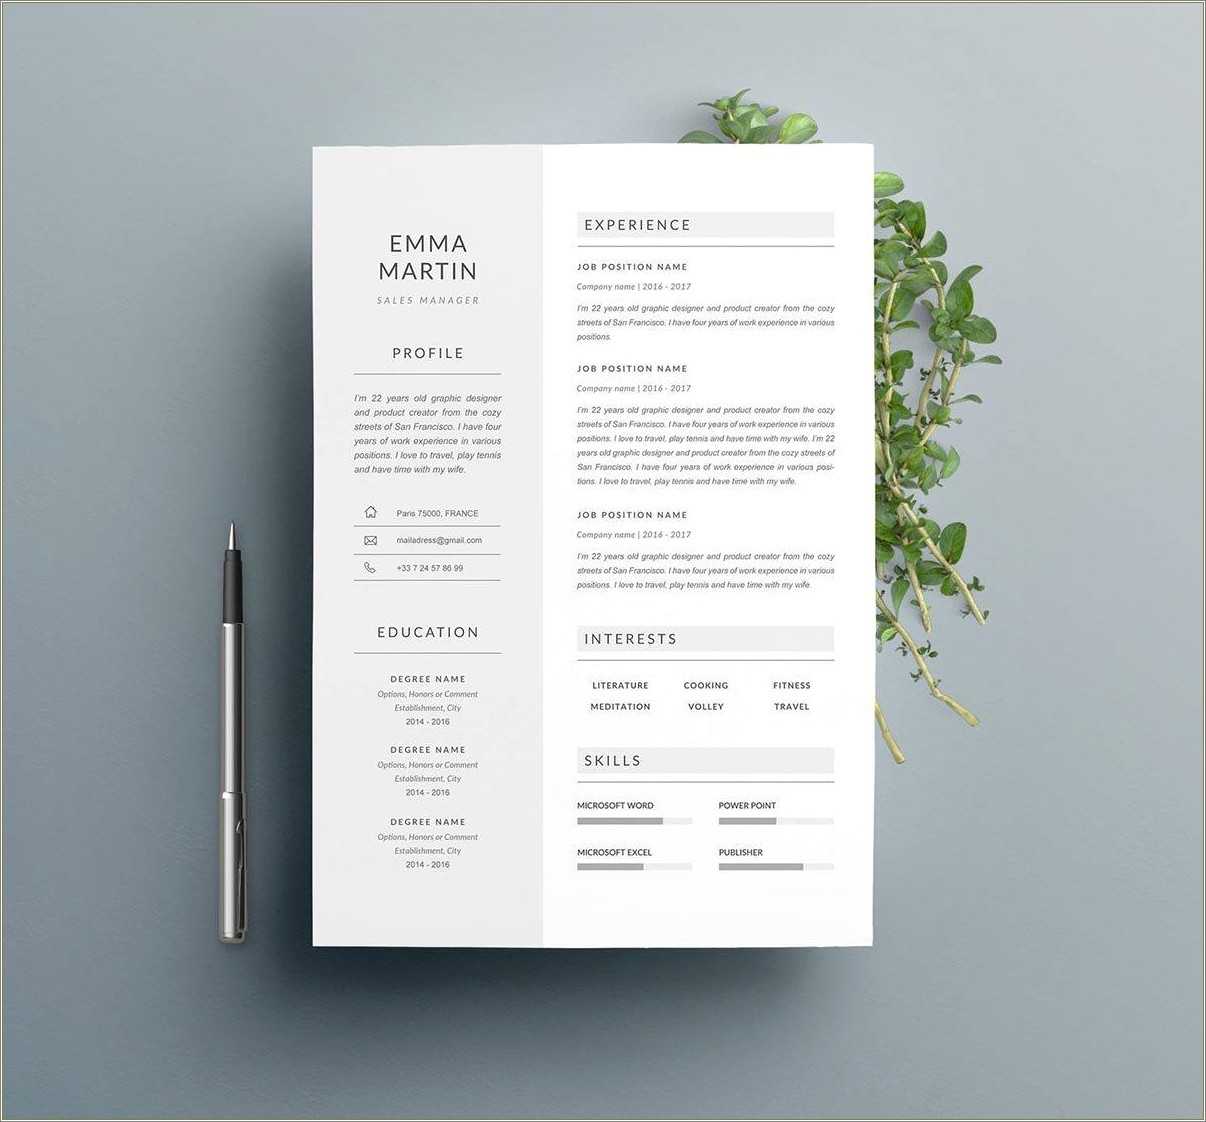 adobe-indesign-resume-template-free-download-resume-example-gallery